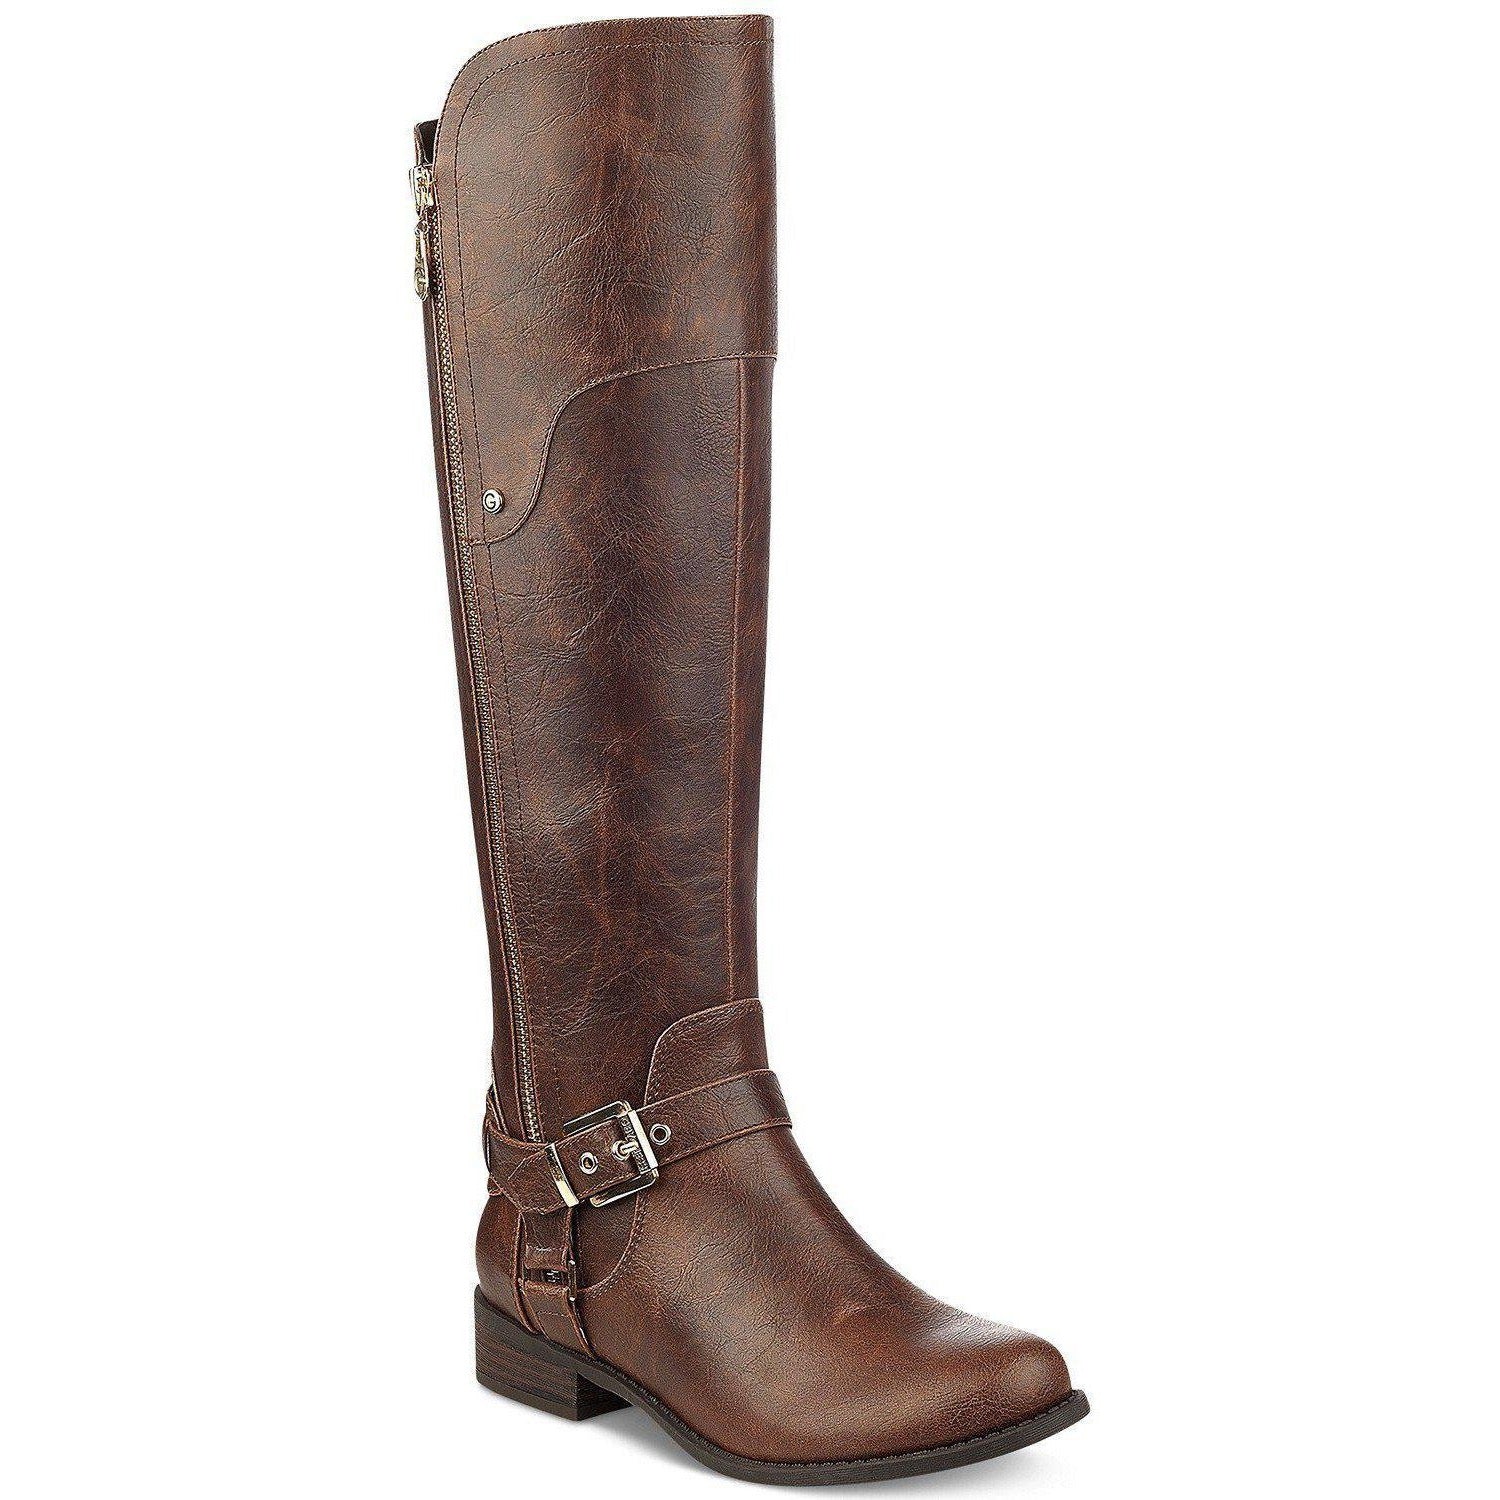 G by Guess Harson Wide-Calf Tall Boots Women's Shoes Brown-Shoes-G By Guess-6-ShoeShock